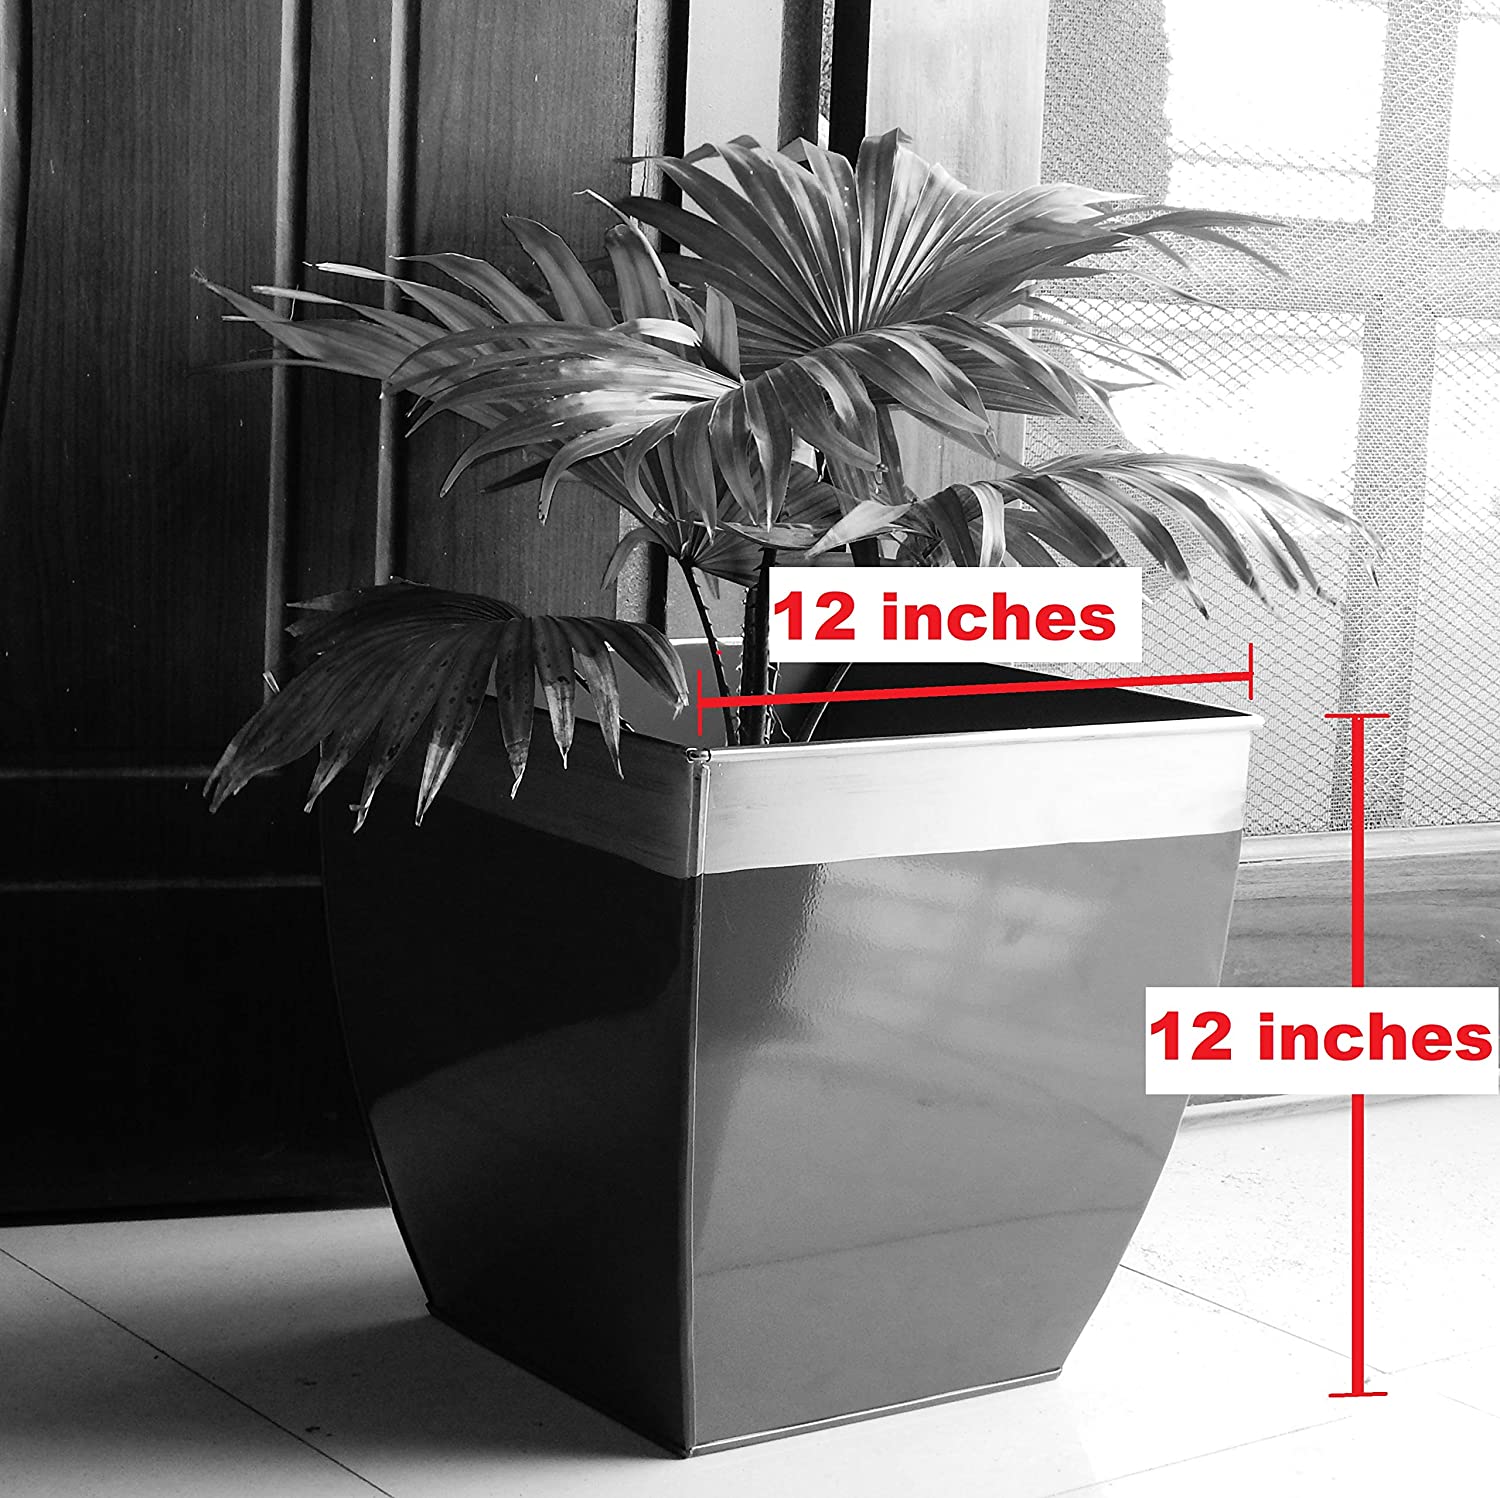 ecofynd metal planter, white, large 12 inches, 2 pieces